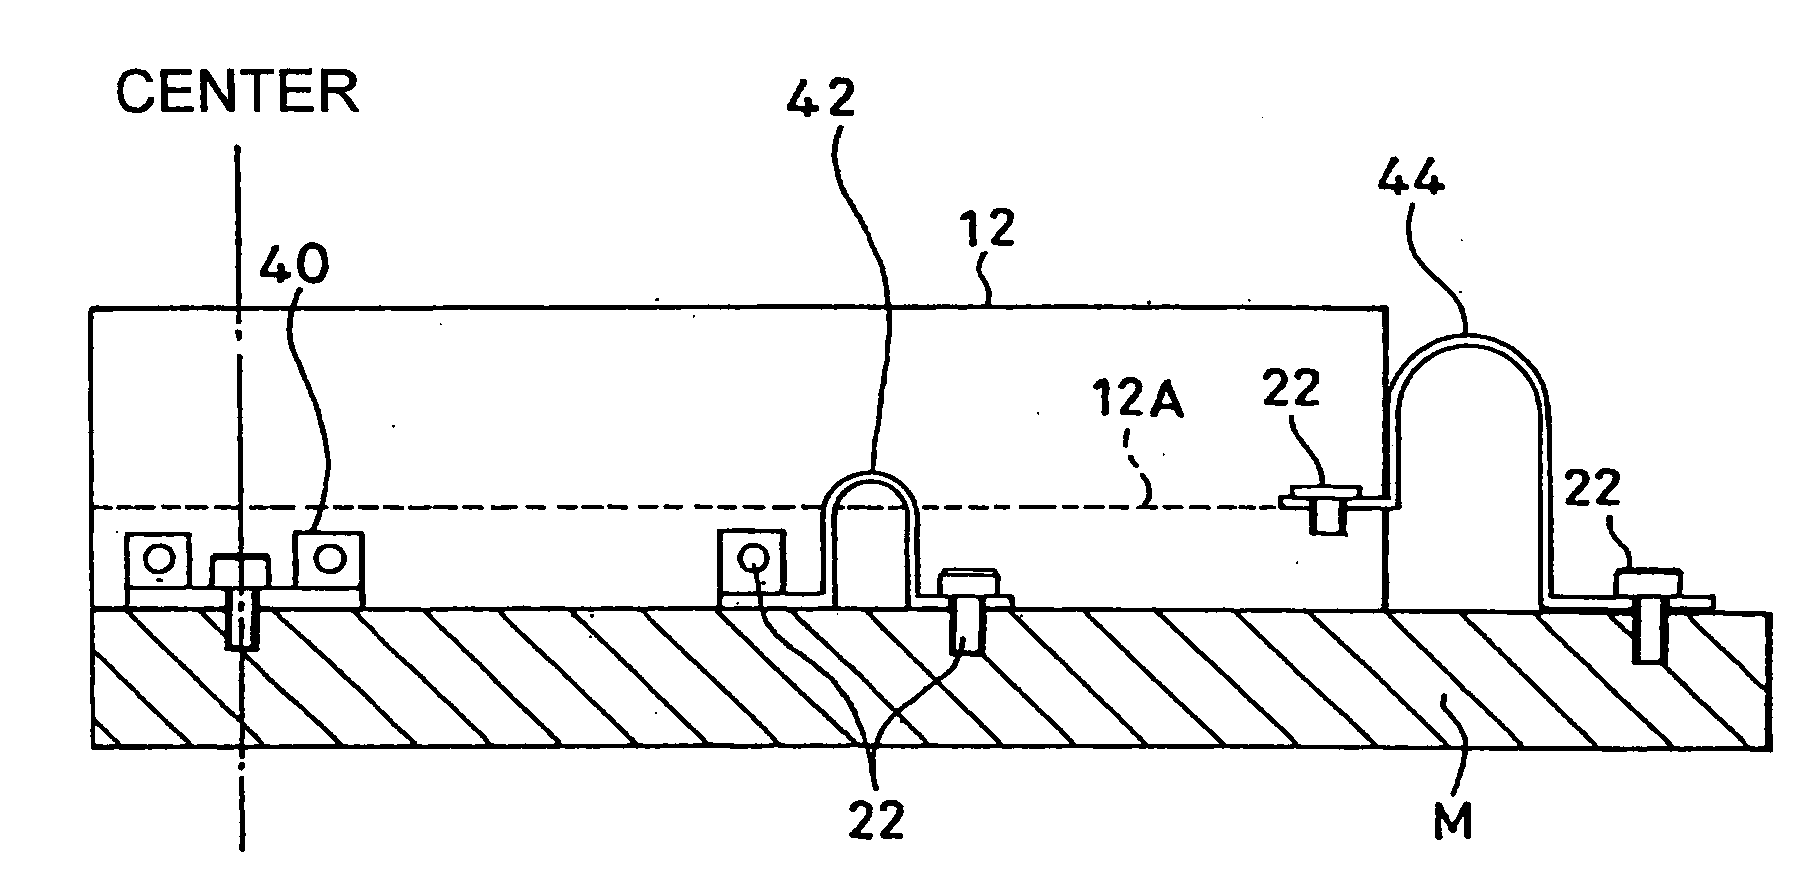 Elastic fixture and attachment method for length measuring apparatus